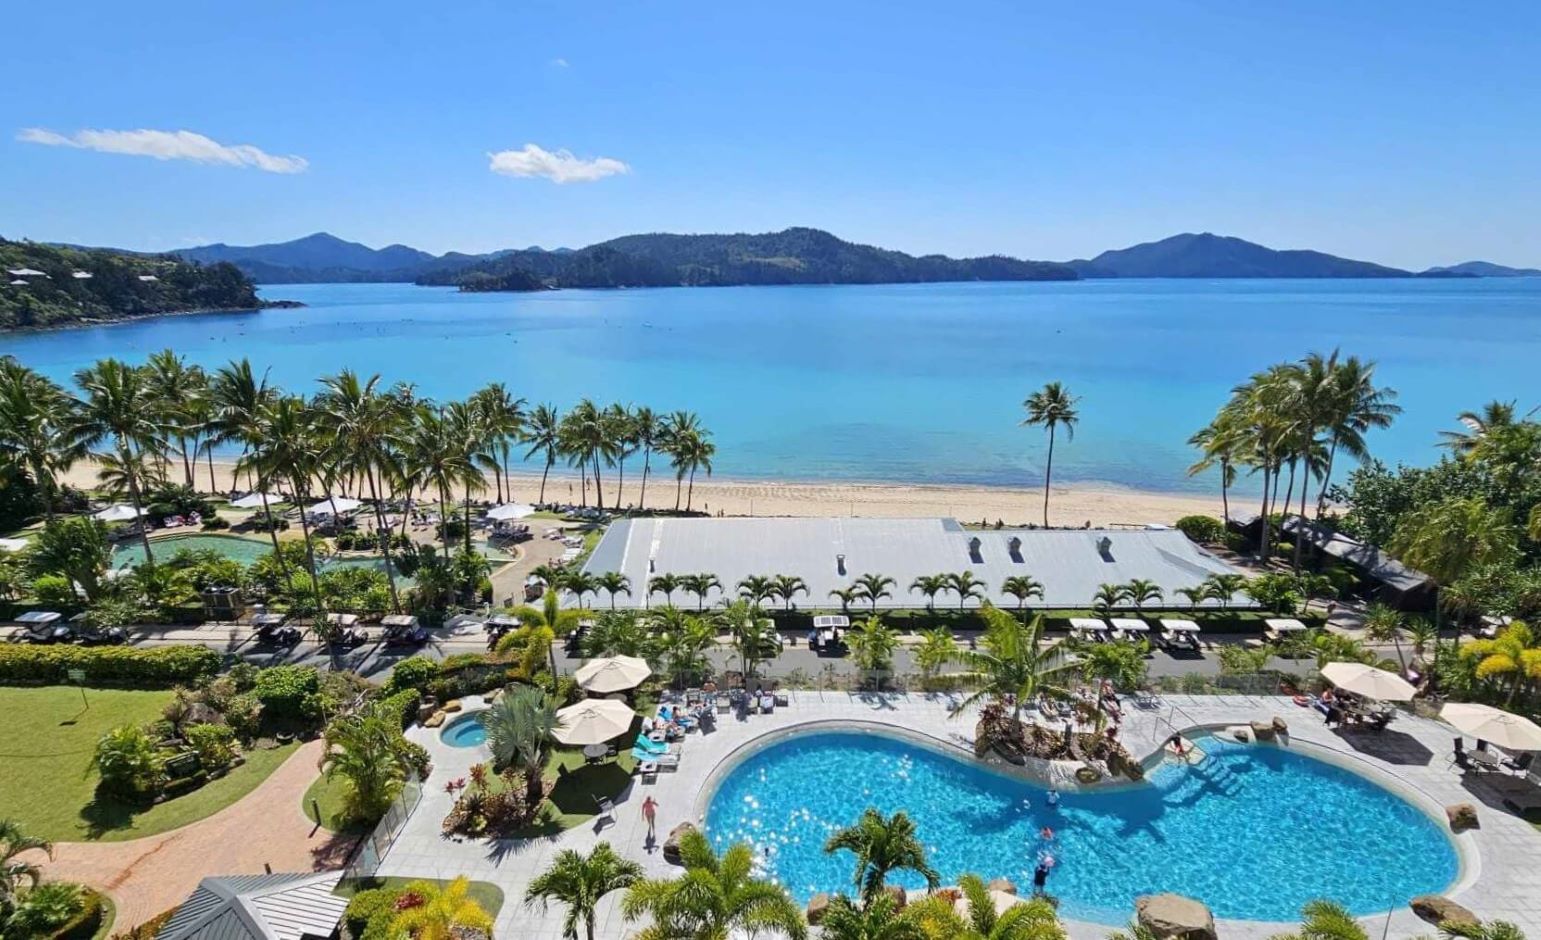 Top 10 Things to do on Hamilton Island with Kids